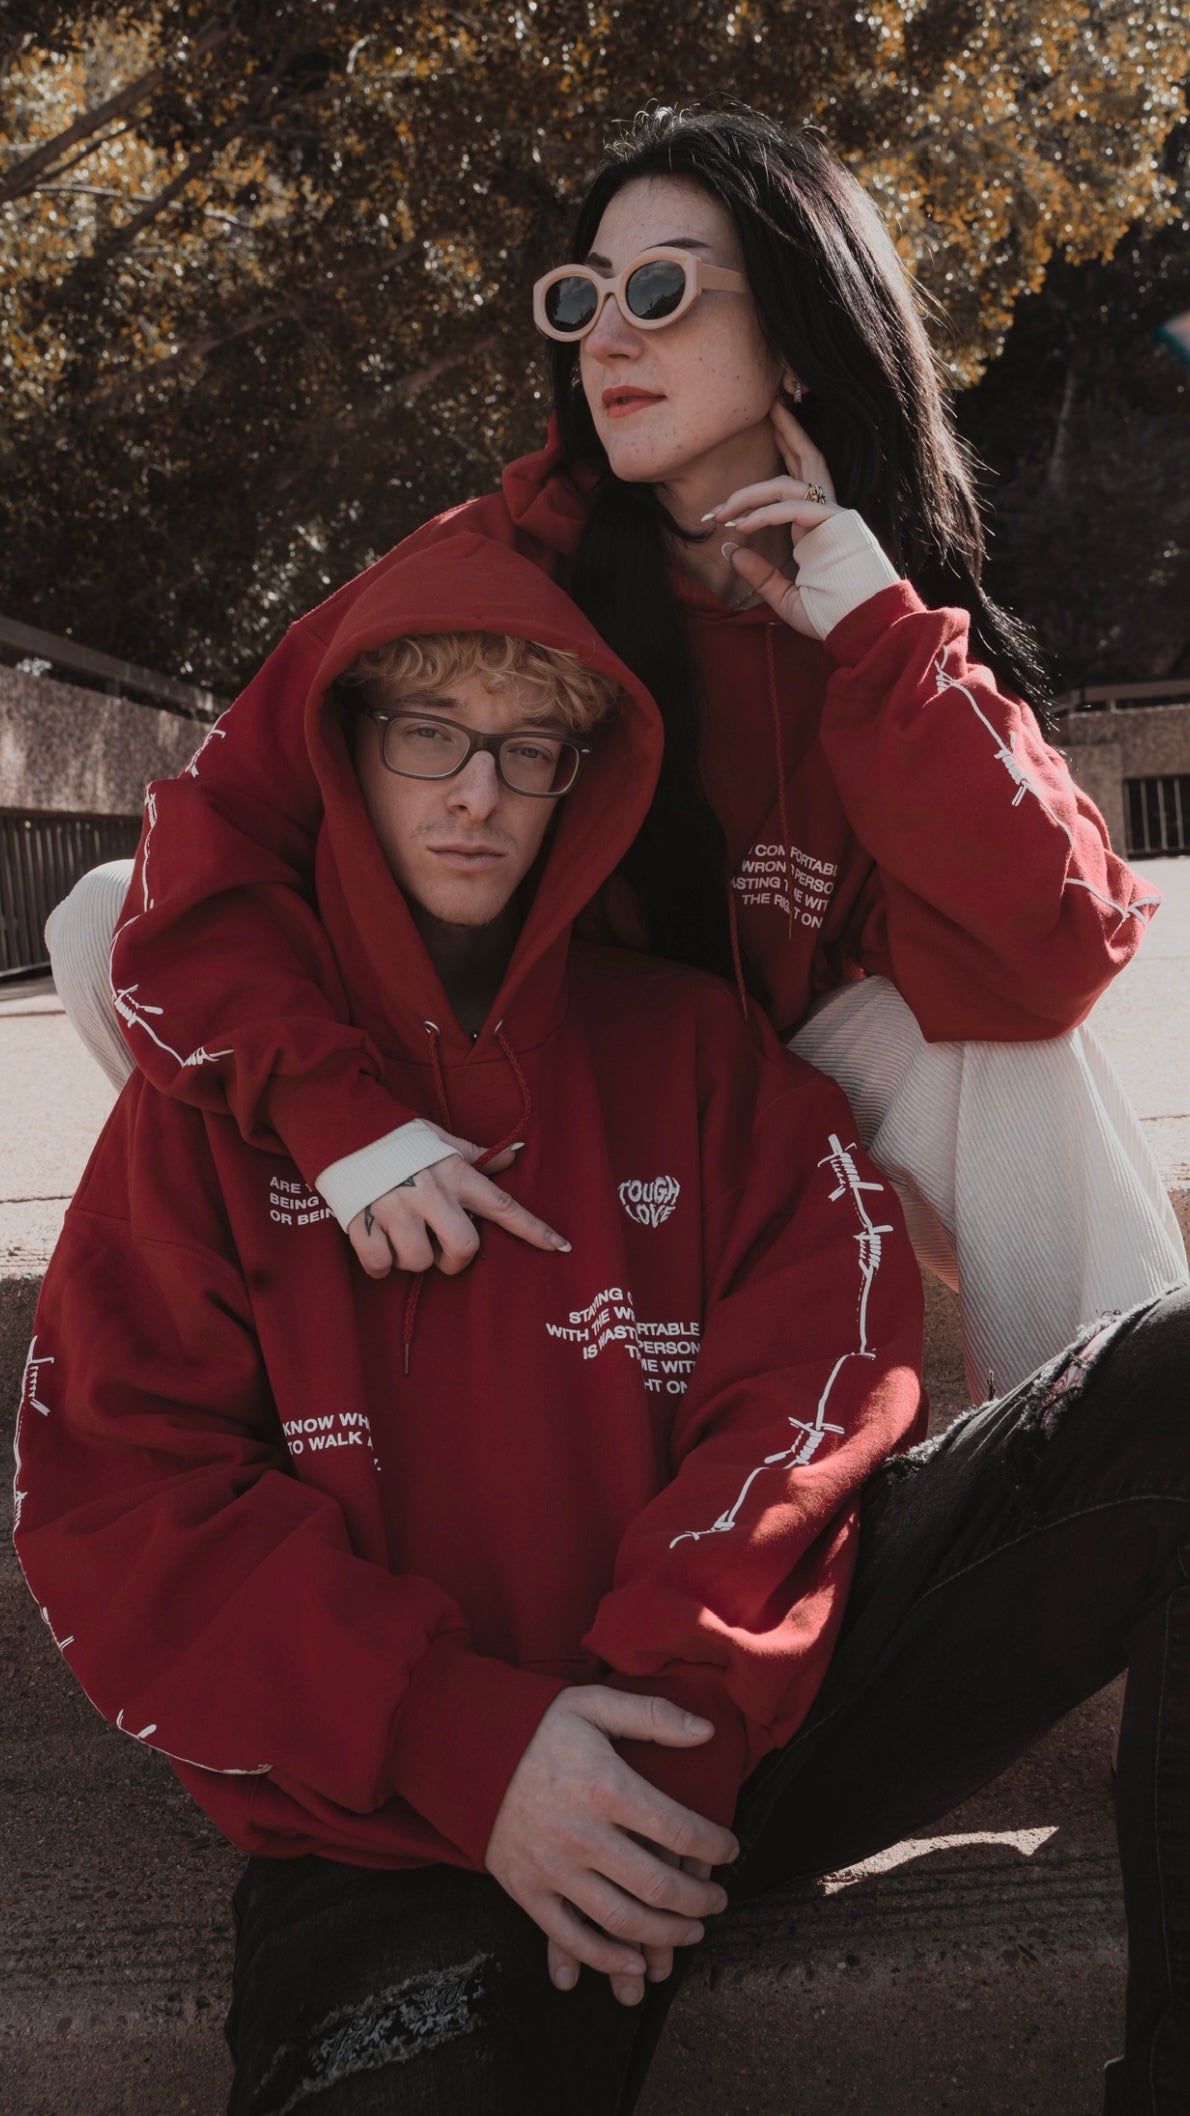 Two models posing in vibrant red Tough Love hoodies with white branding, expressing urban style